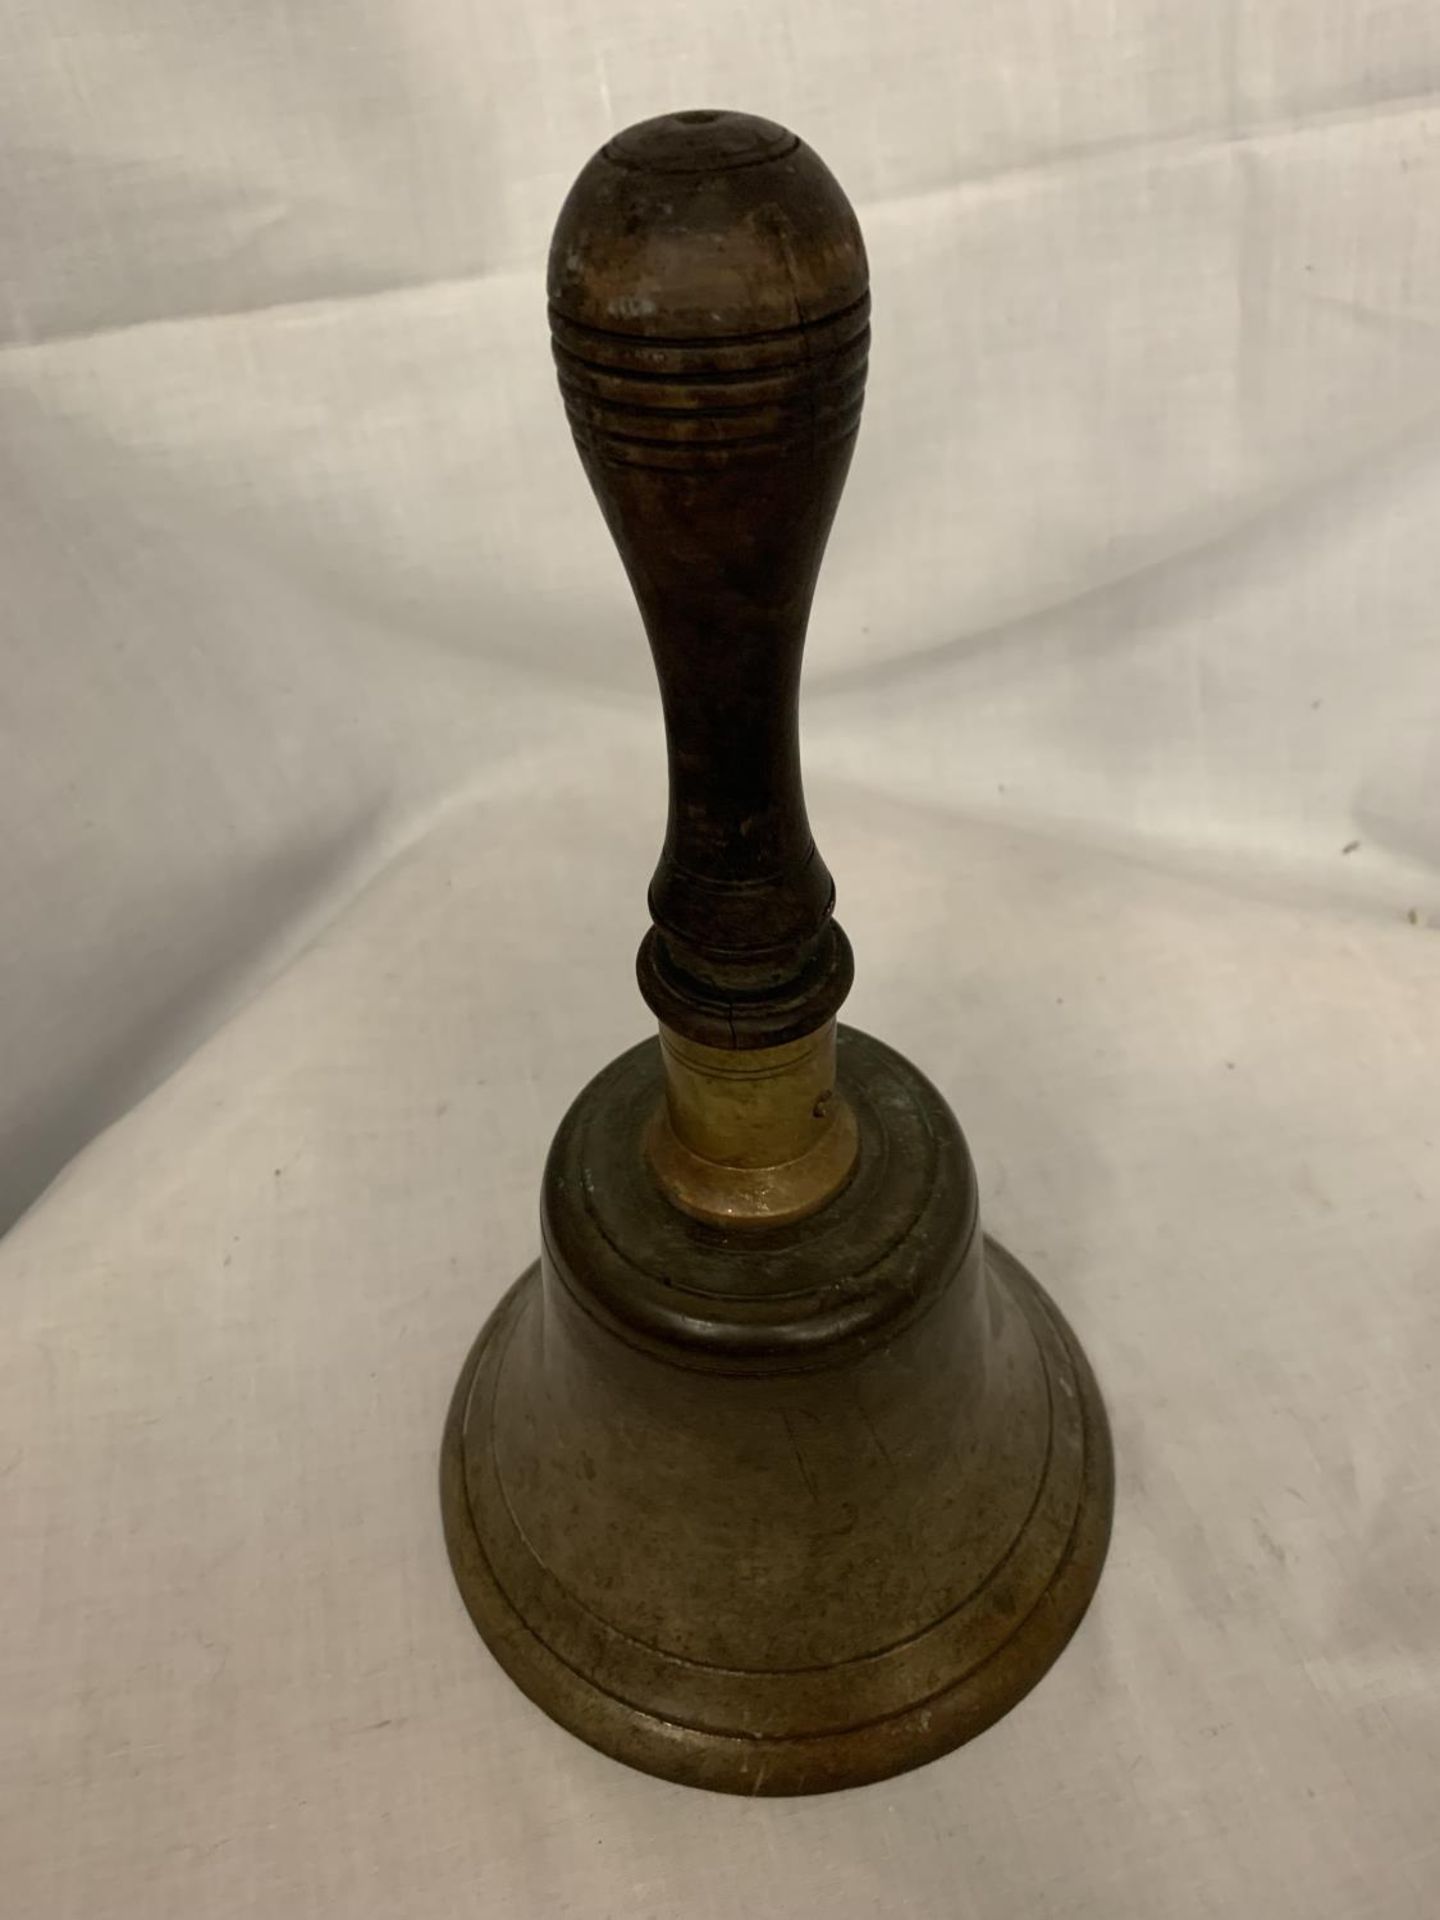 A VINTAGE BRASS SCHOOL BELL WITH WOODEN HANDLE - Image 3 of 4